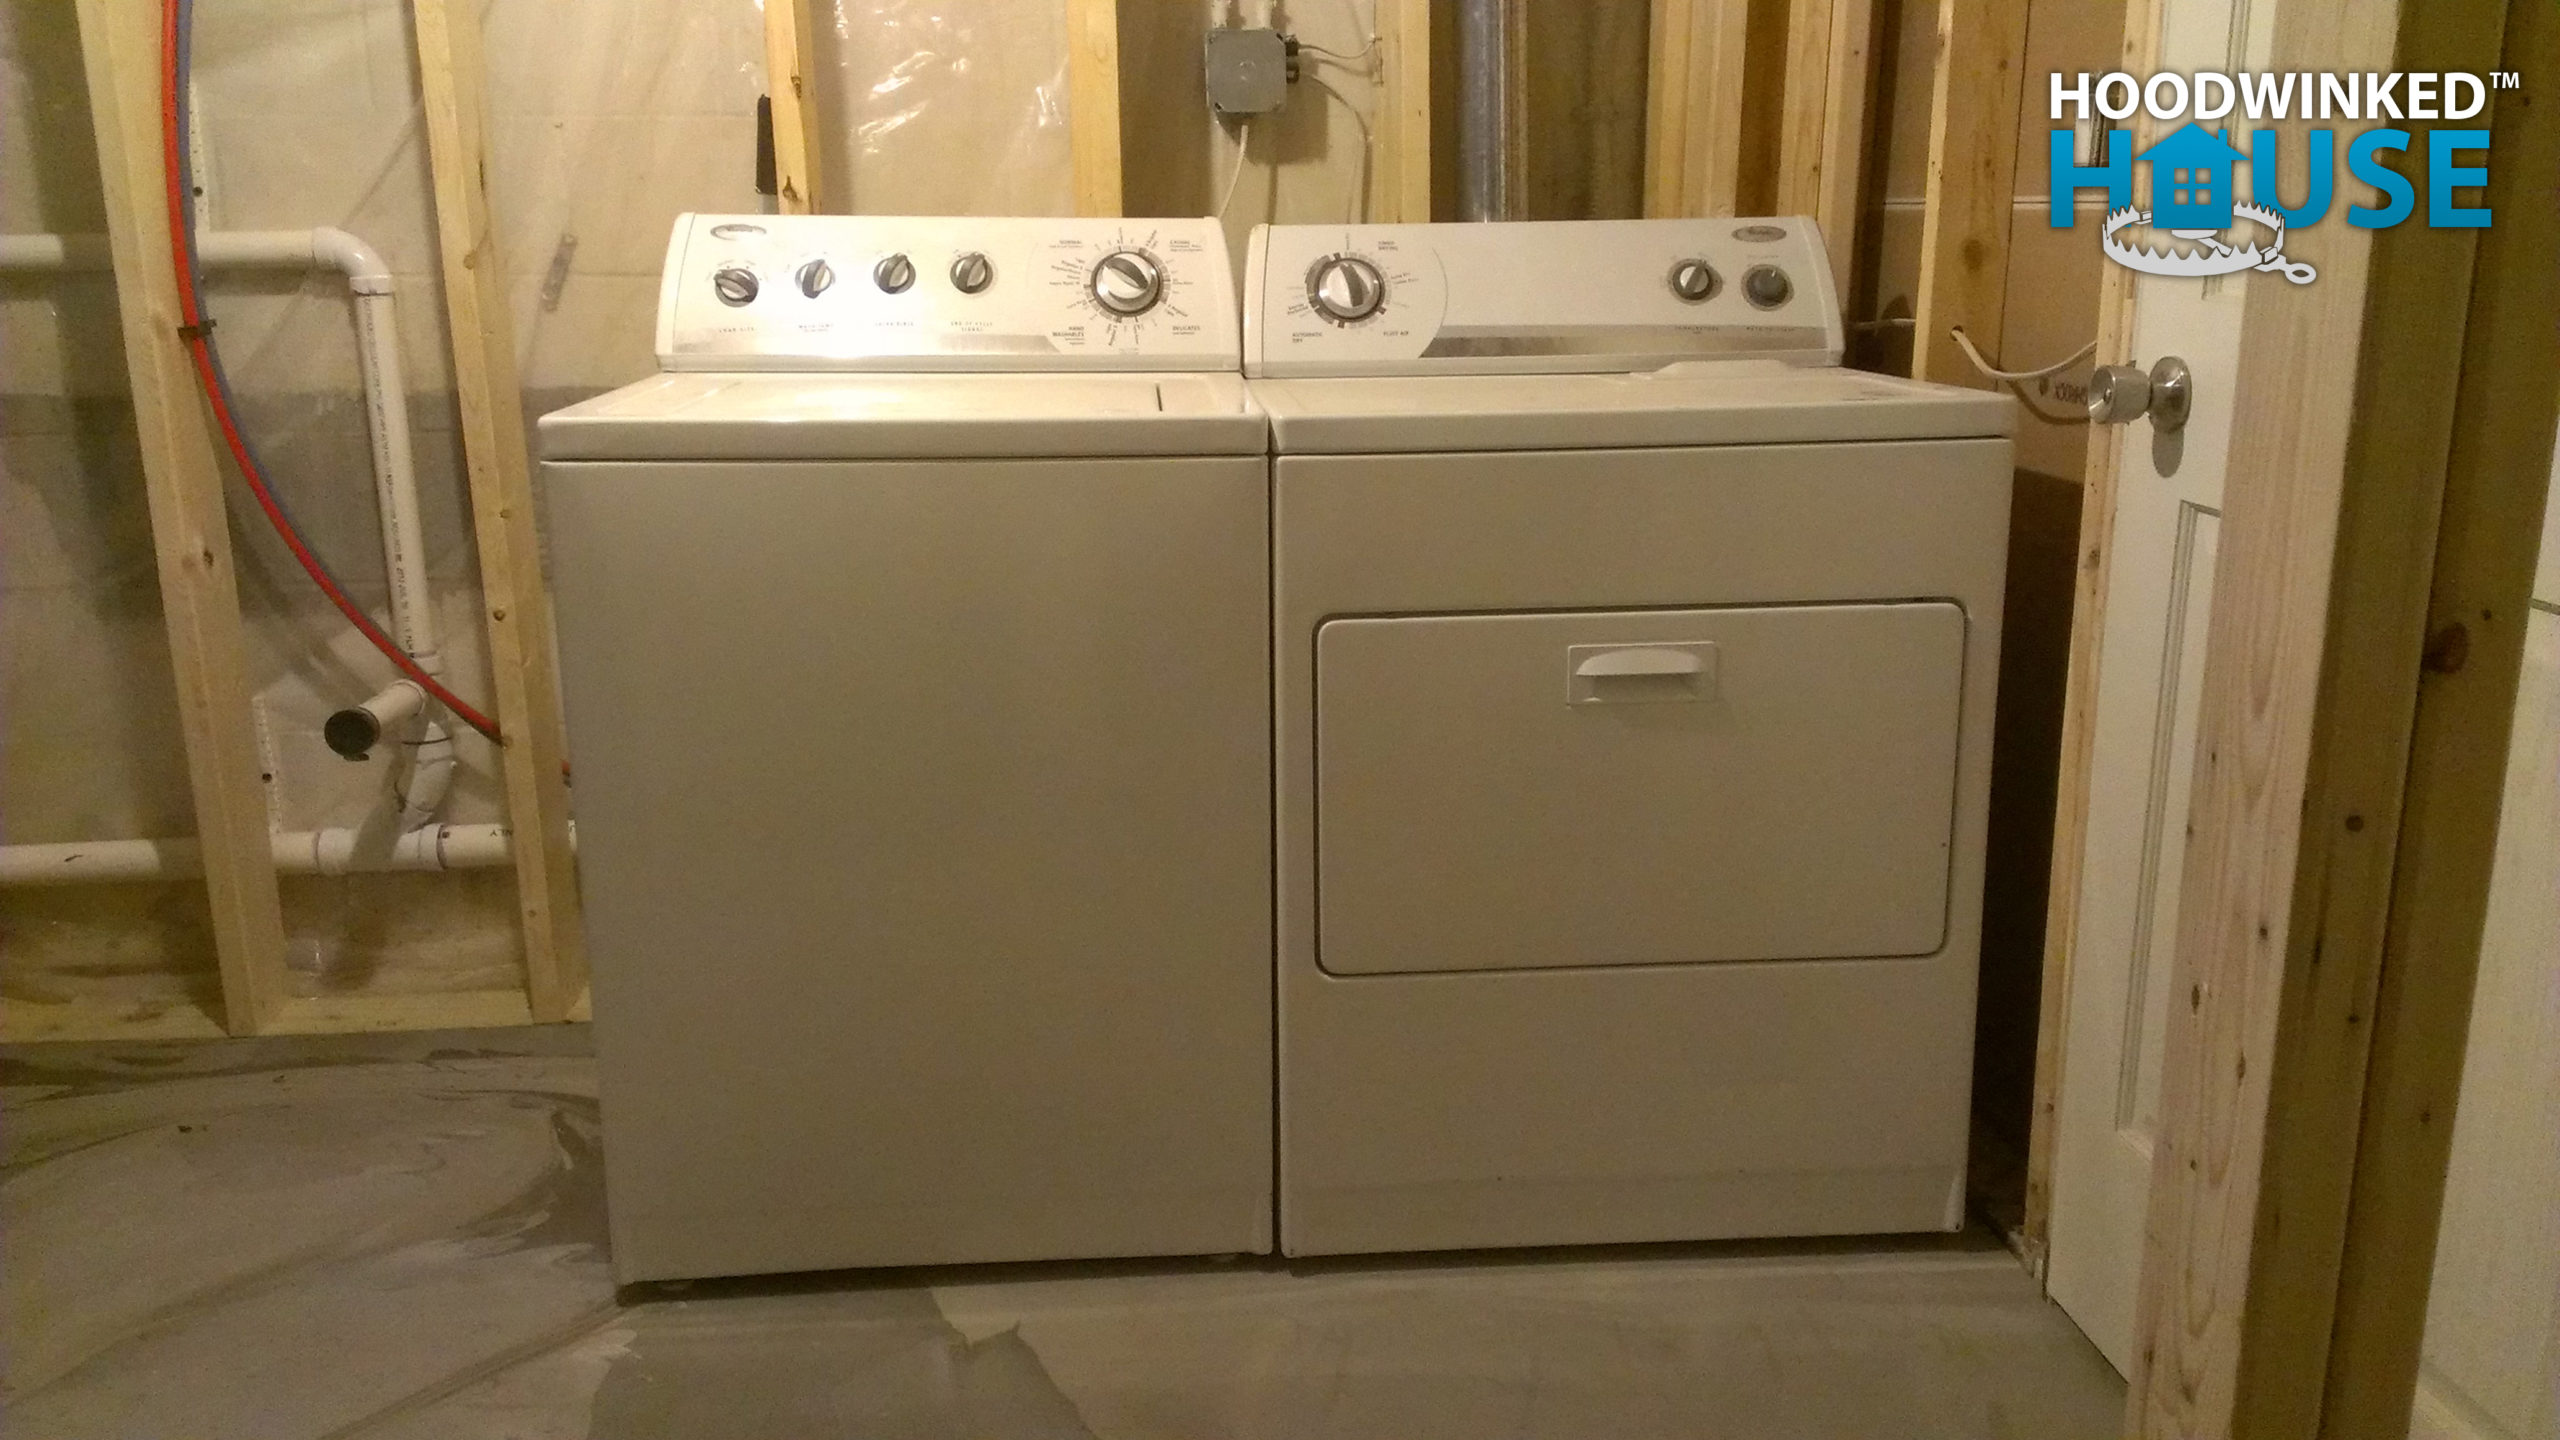 A washer and dryer sit in an unfinished basement laundry room.